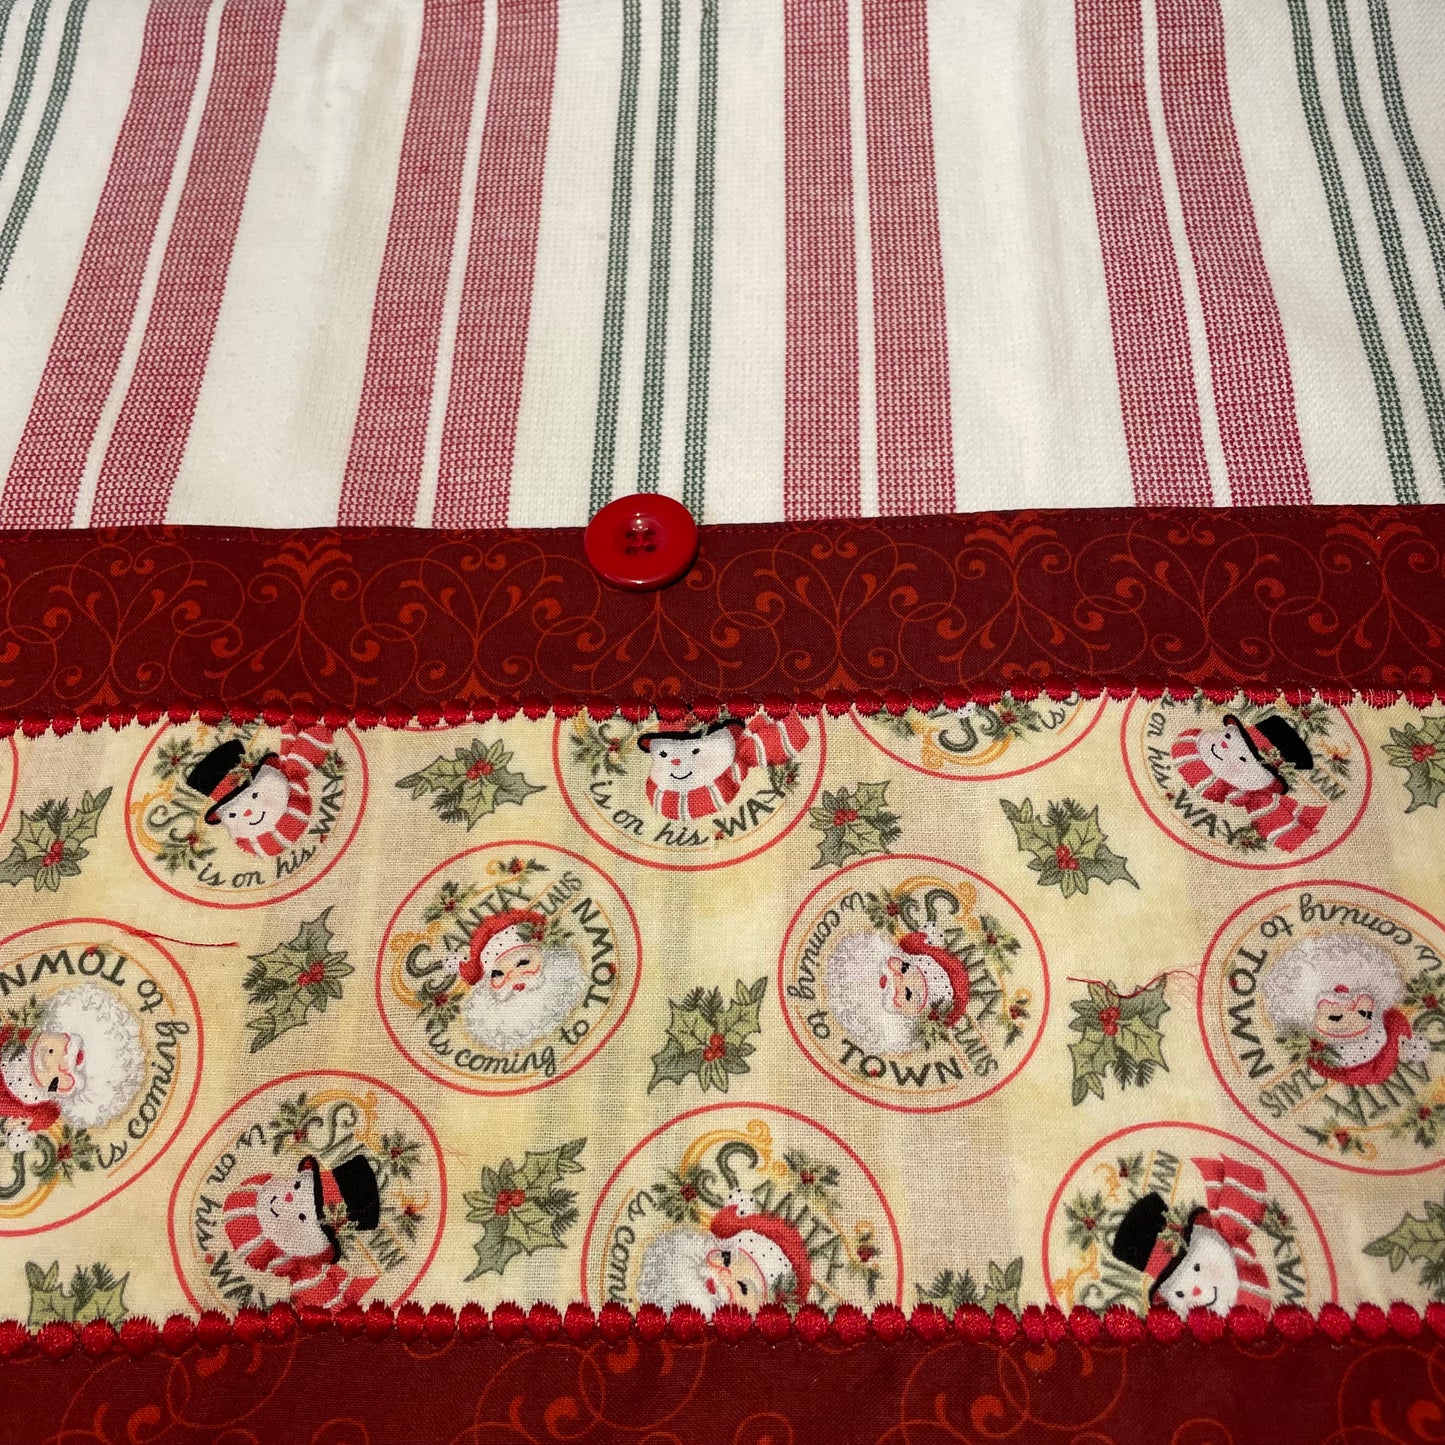 Cute Red Christmas Dish Towel with Santas and Snowmen - Home Stitchery Decor